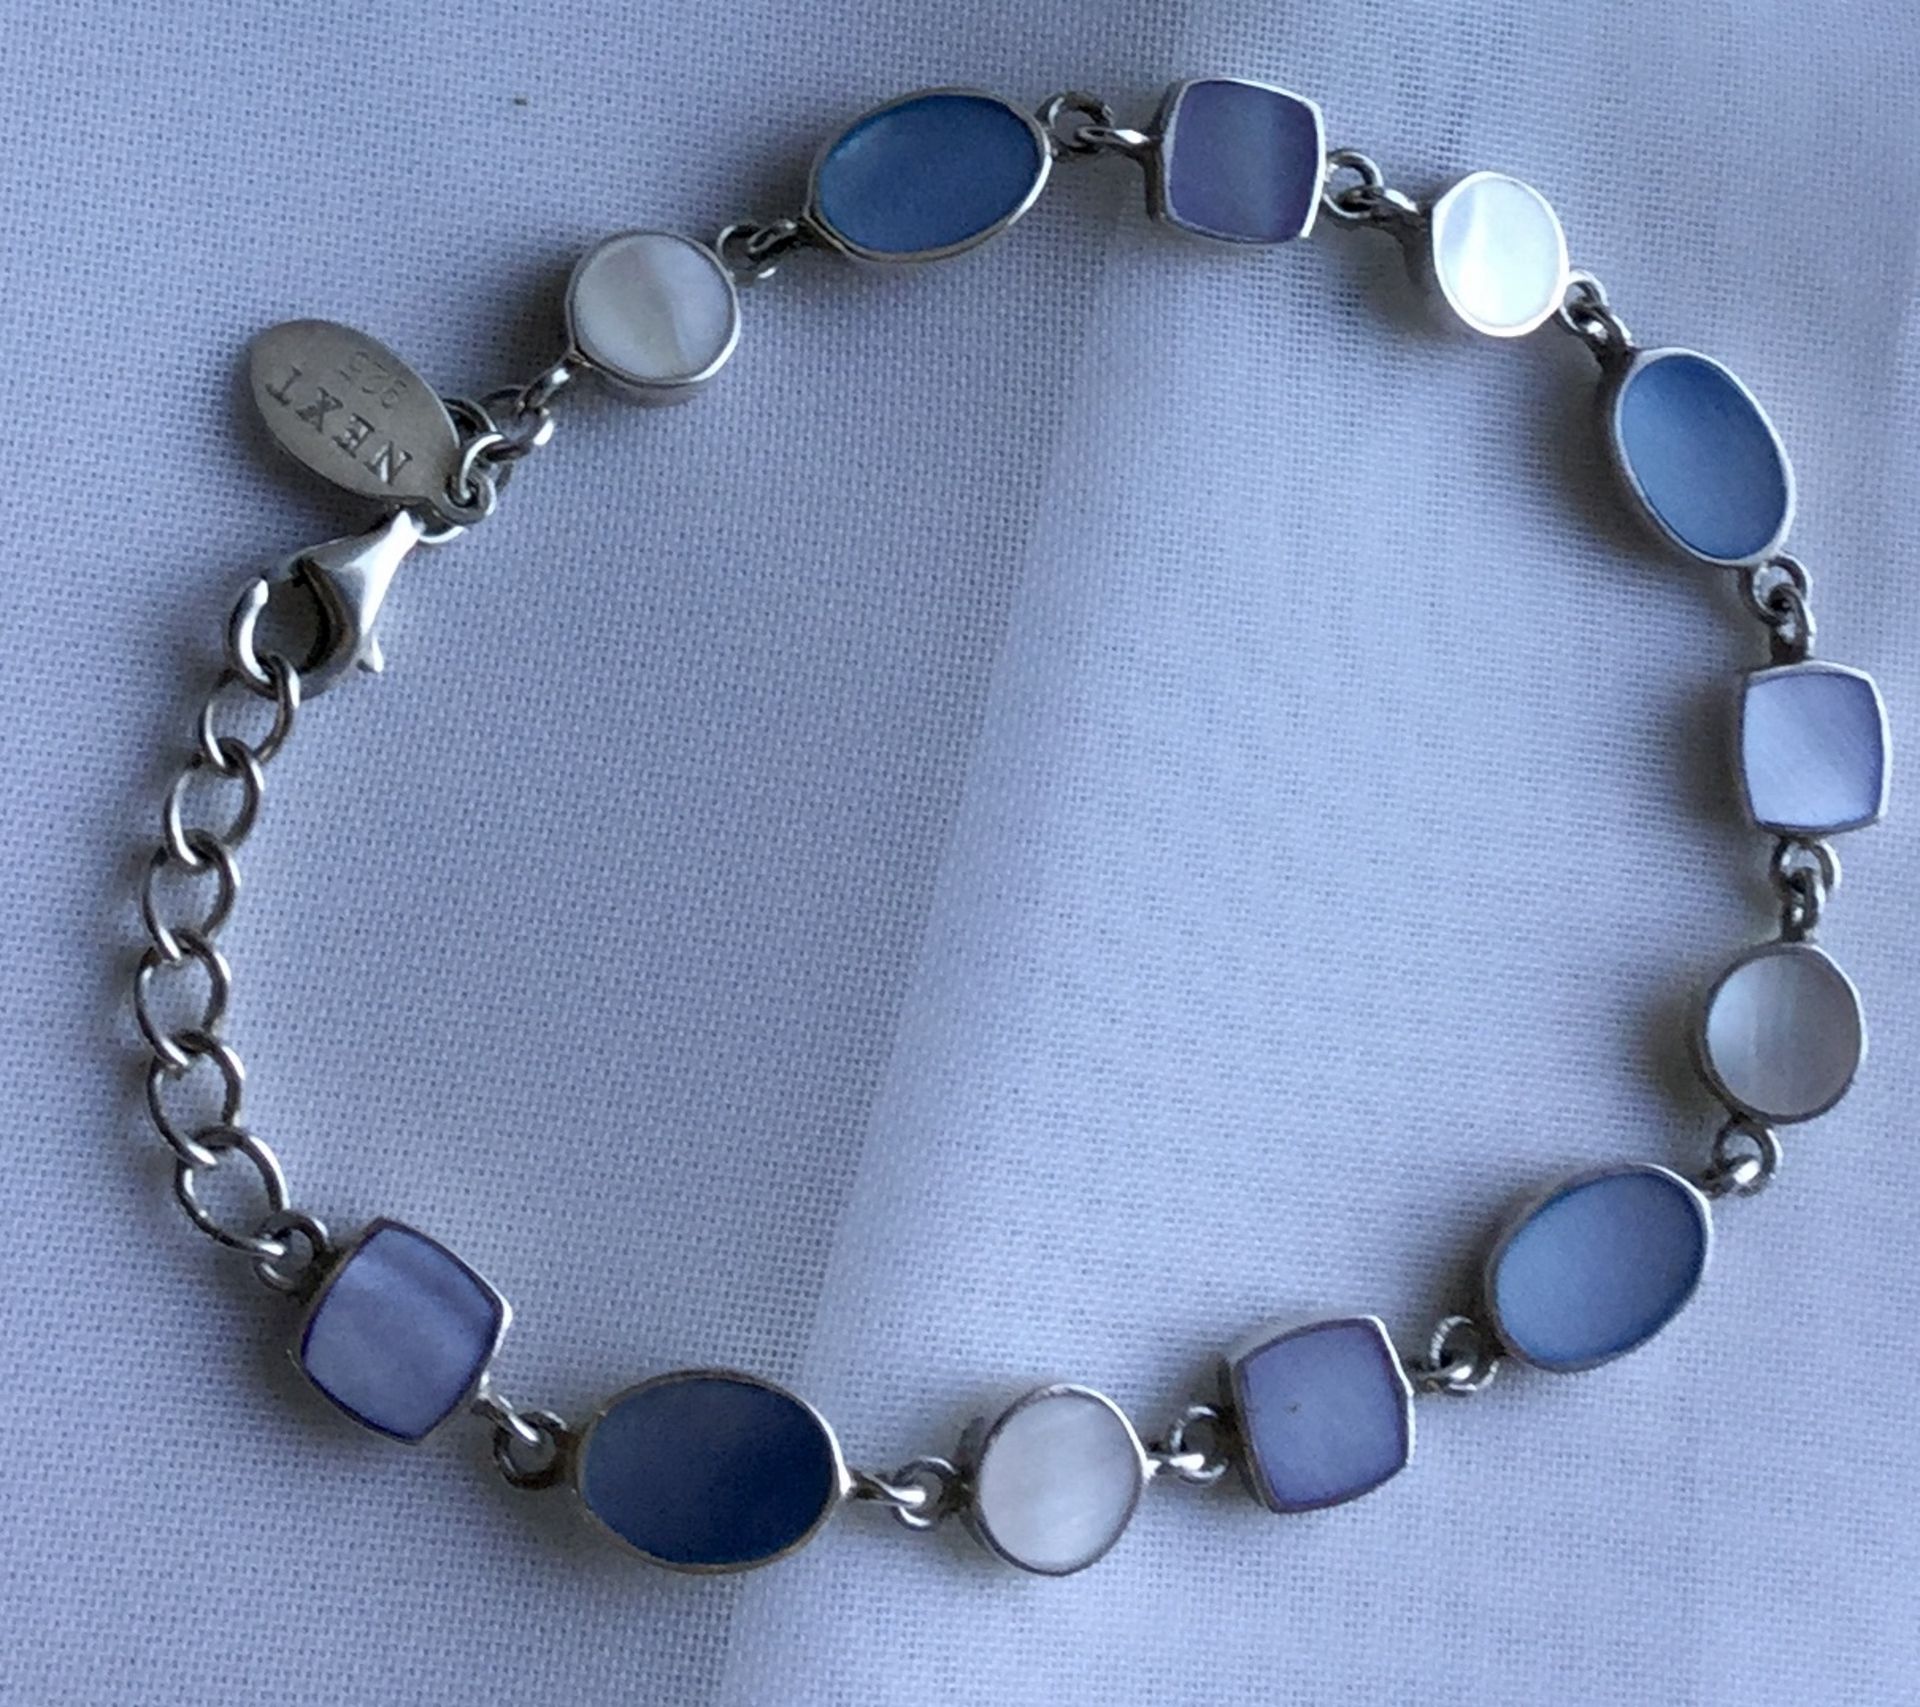 Silver Mother of Pearl Bracelet 7” - Image 5 of 8